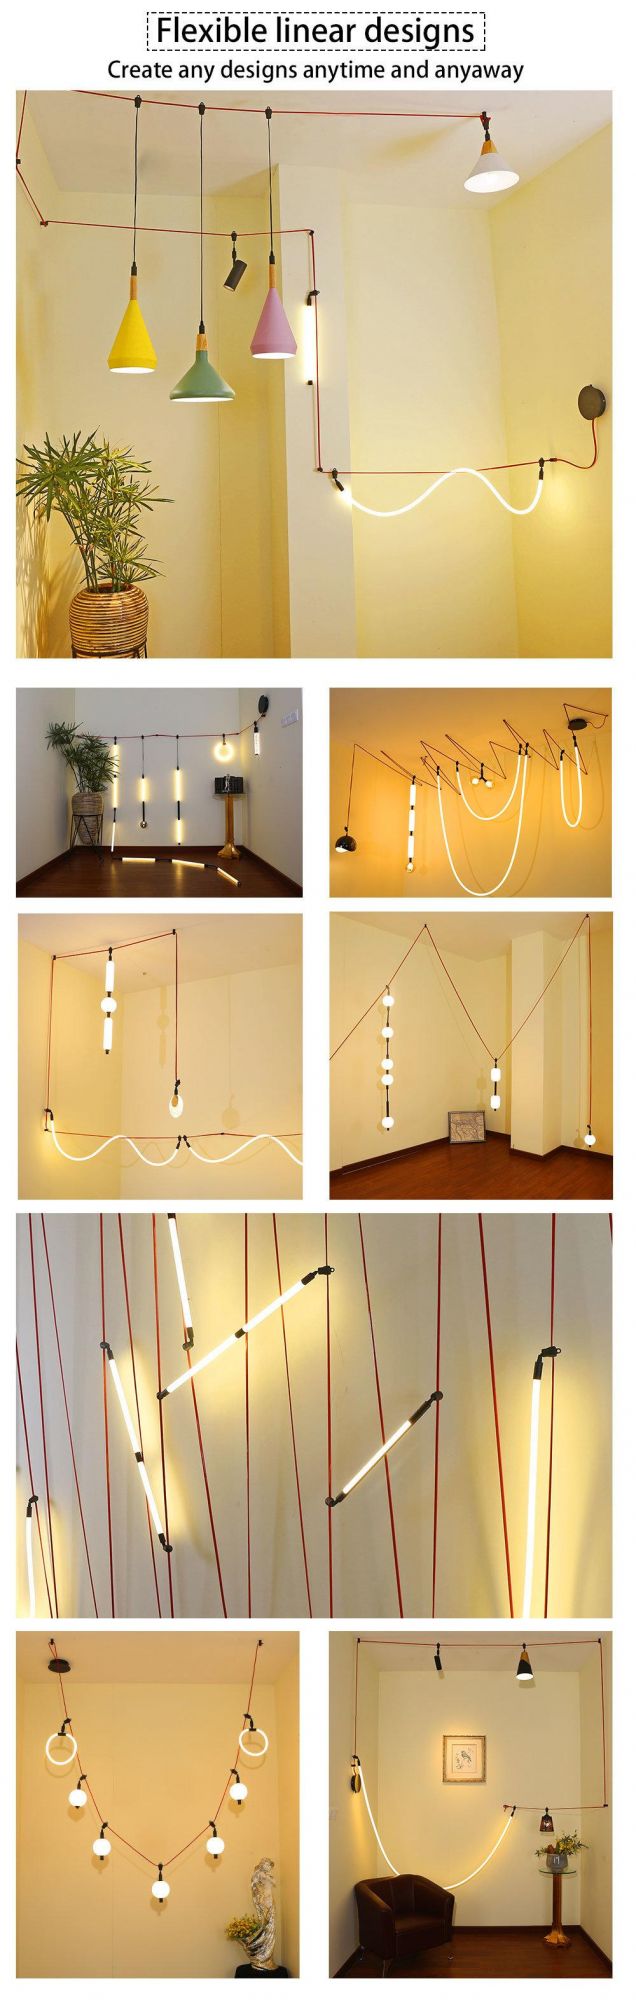 LED Indoor Designer Flexible Linear Black Red Wire Glass Acrylic Shade Decoration Chandelier Pendant Ceiling Spot Track Lamp Light